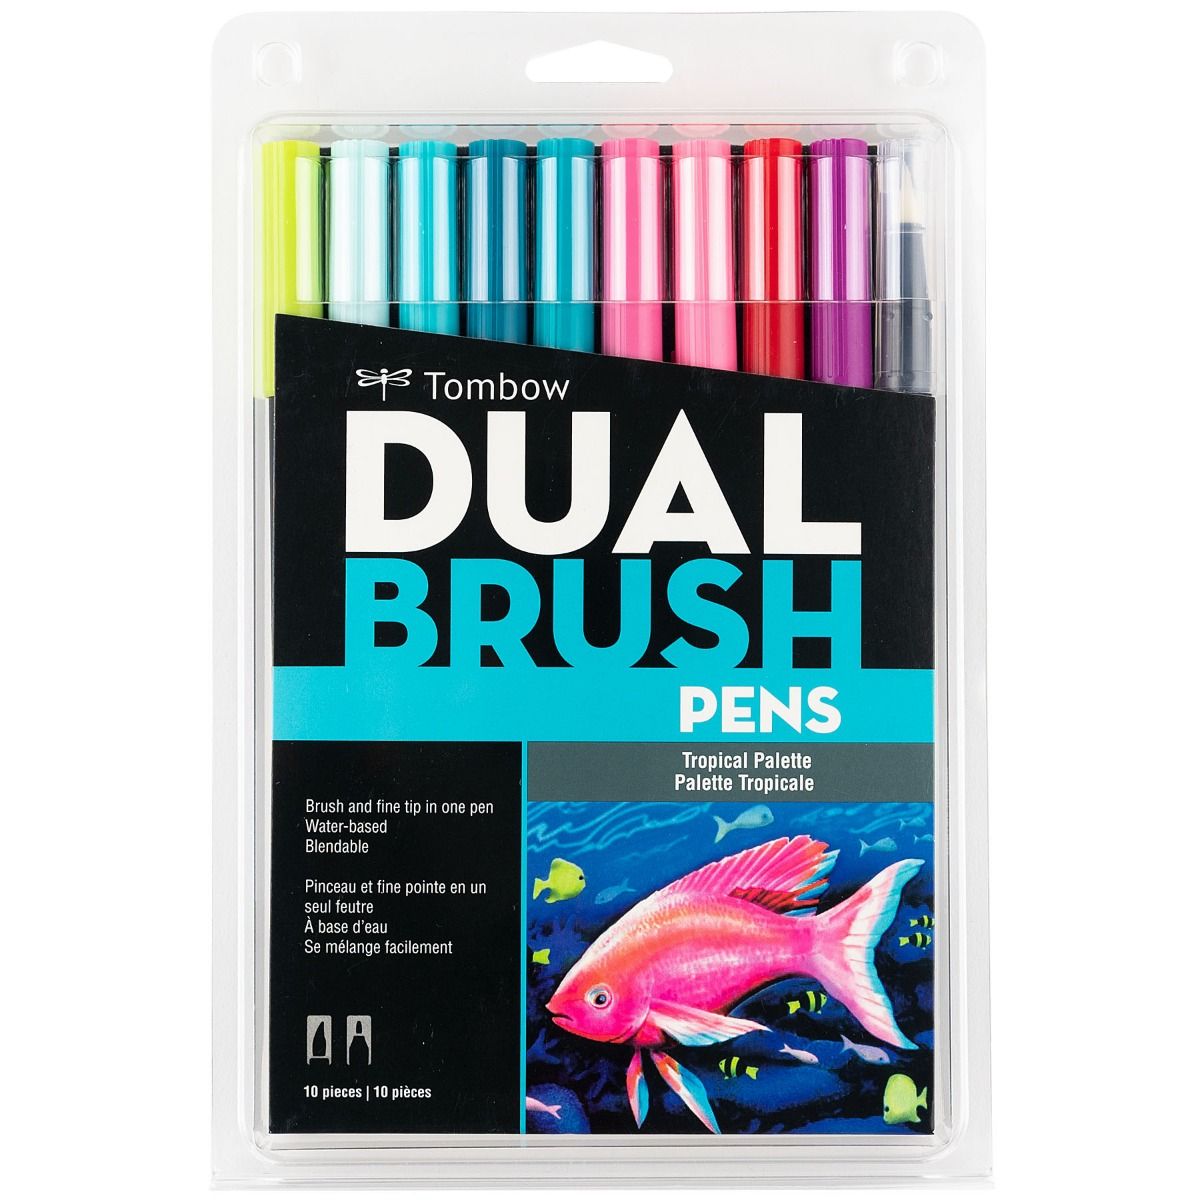 100 Colors Dye Ink Blendable Watercolor Real Brush Marker Pen with Water Pen  - China Nylon Tip Pen, Brush Marker